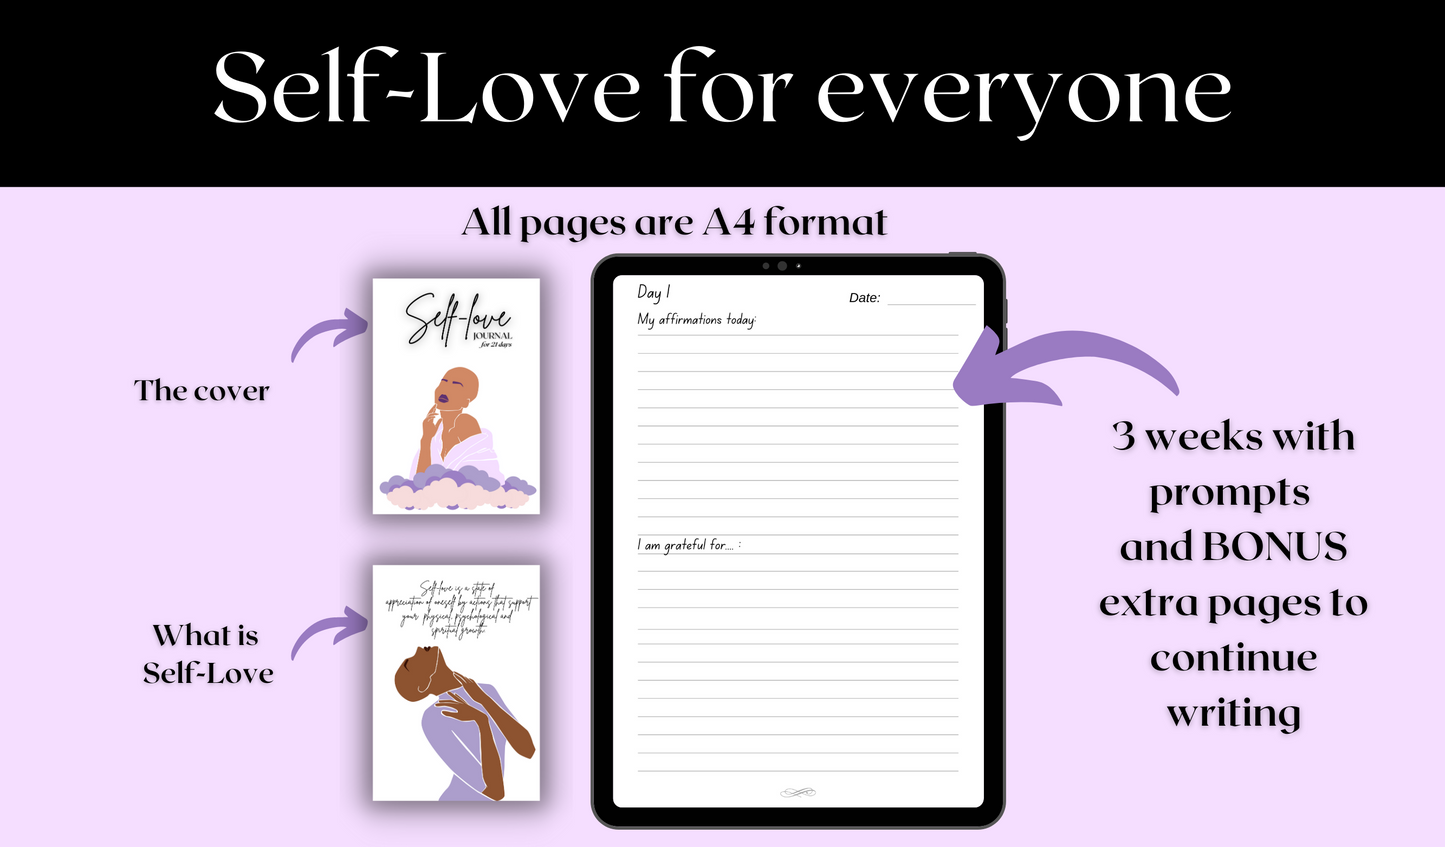 self love is for everyone and all pages are a4 format, you get 3 weeks of journal pages and bonus extra pages to continue writing even after the 21 days